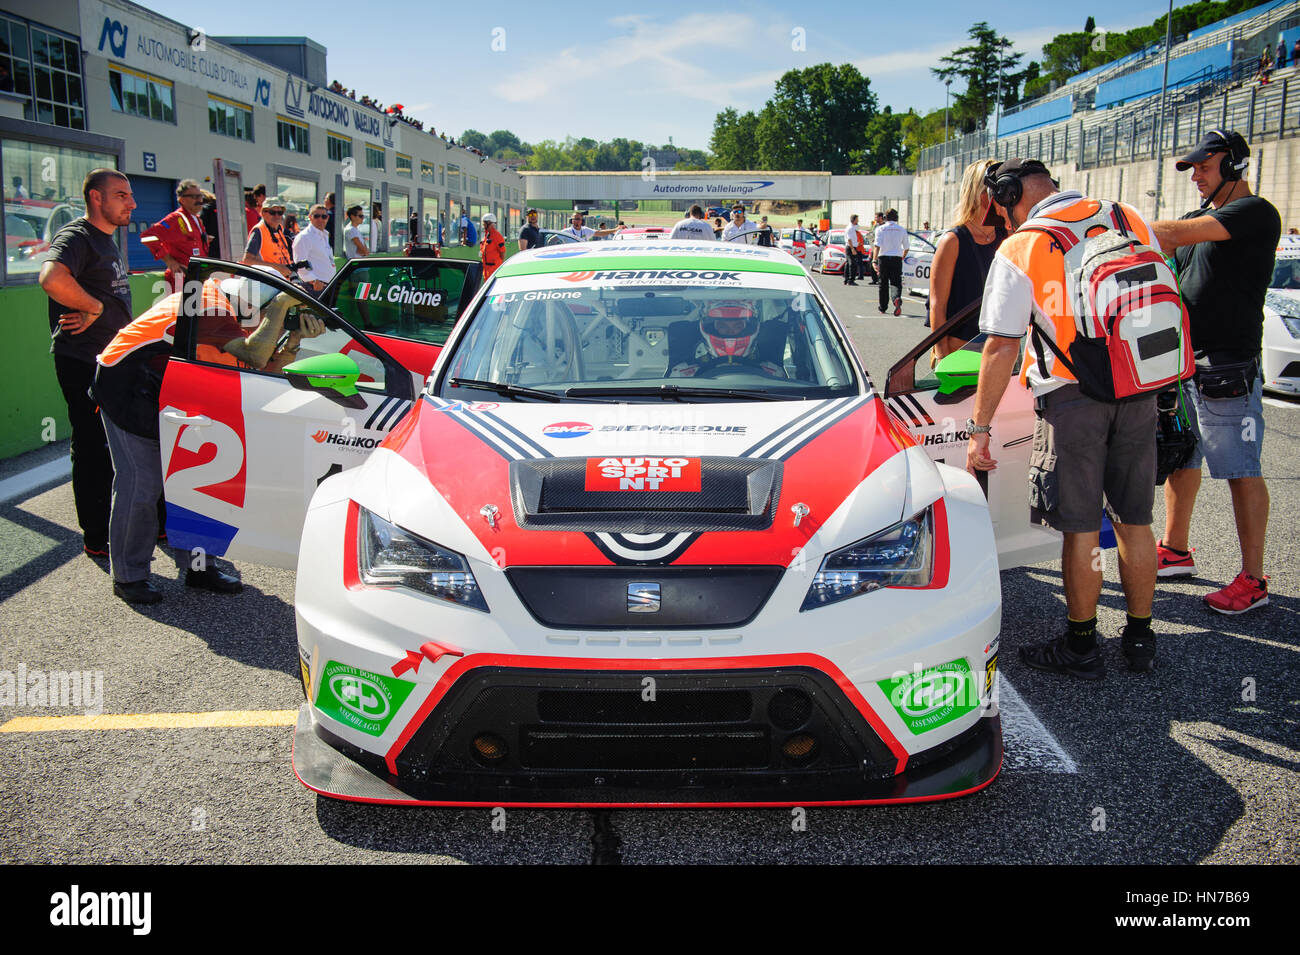 Vallelunga, Rome, Italy. September 4th 2016. Italian Touring Championship: driver Jimmy Ghione and Seat Leon on starting line Stock Photo